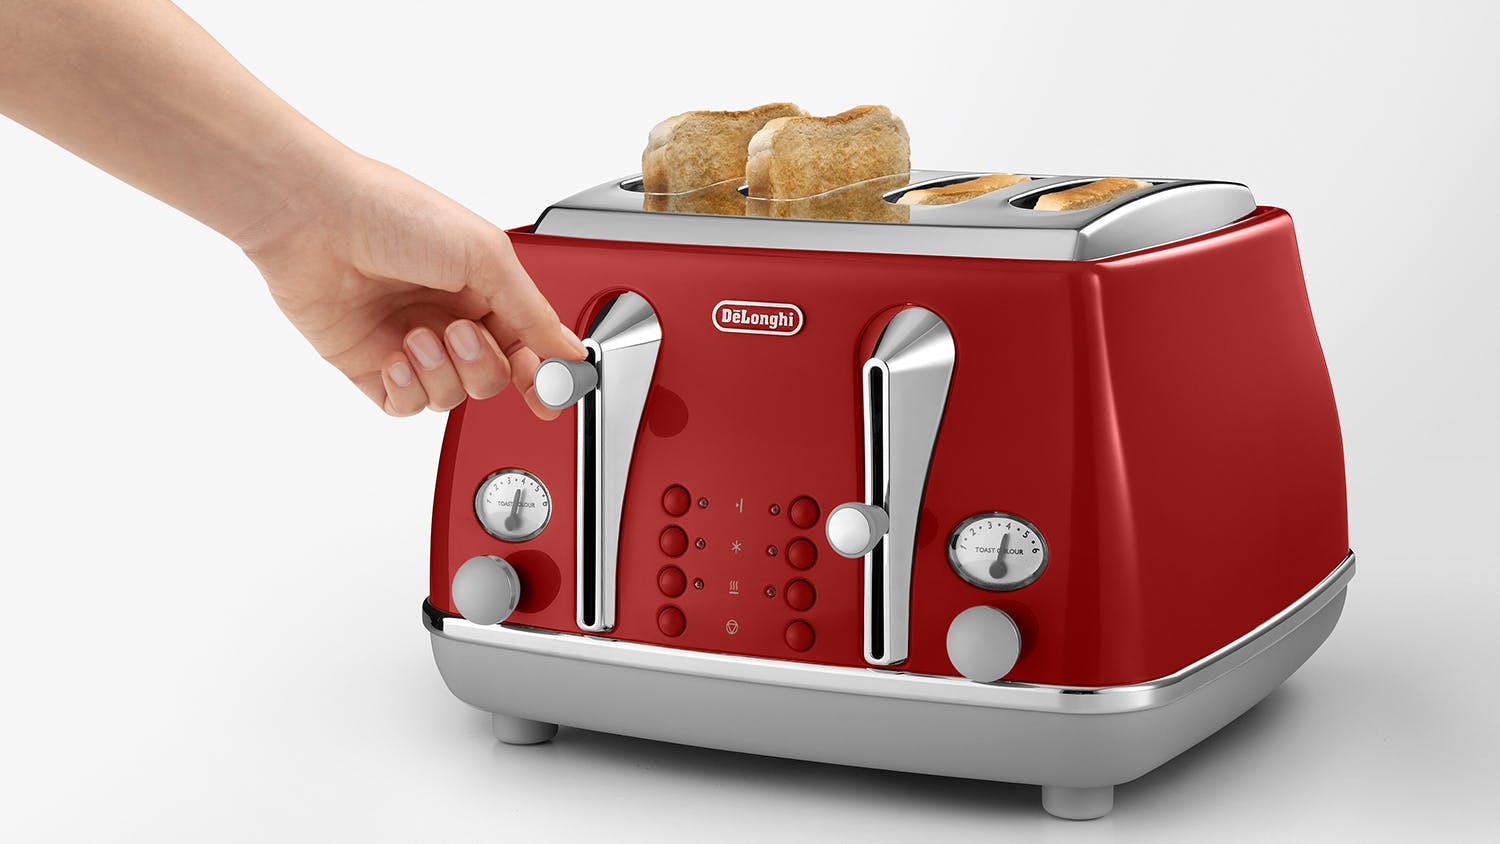 Toaster delonghi icona capitals 2 tranches - 900w - grille pain 3 fonctions  - chauffe viennoisseries inclus - rouge DEL8004399762718 - Conforama